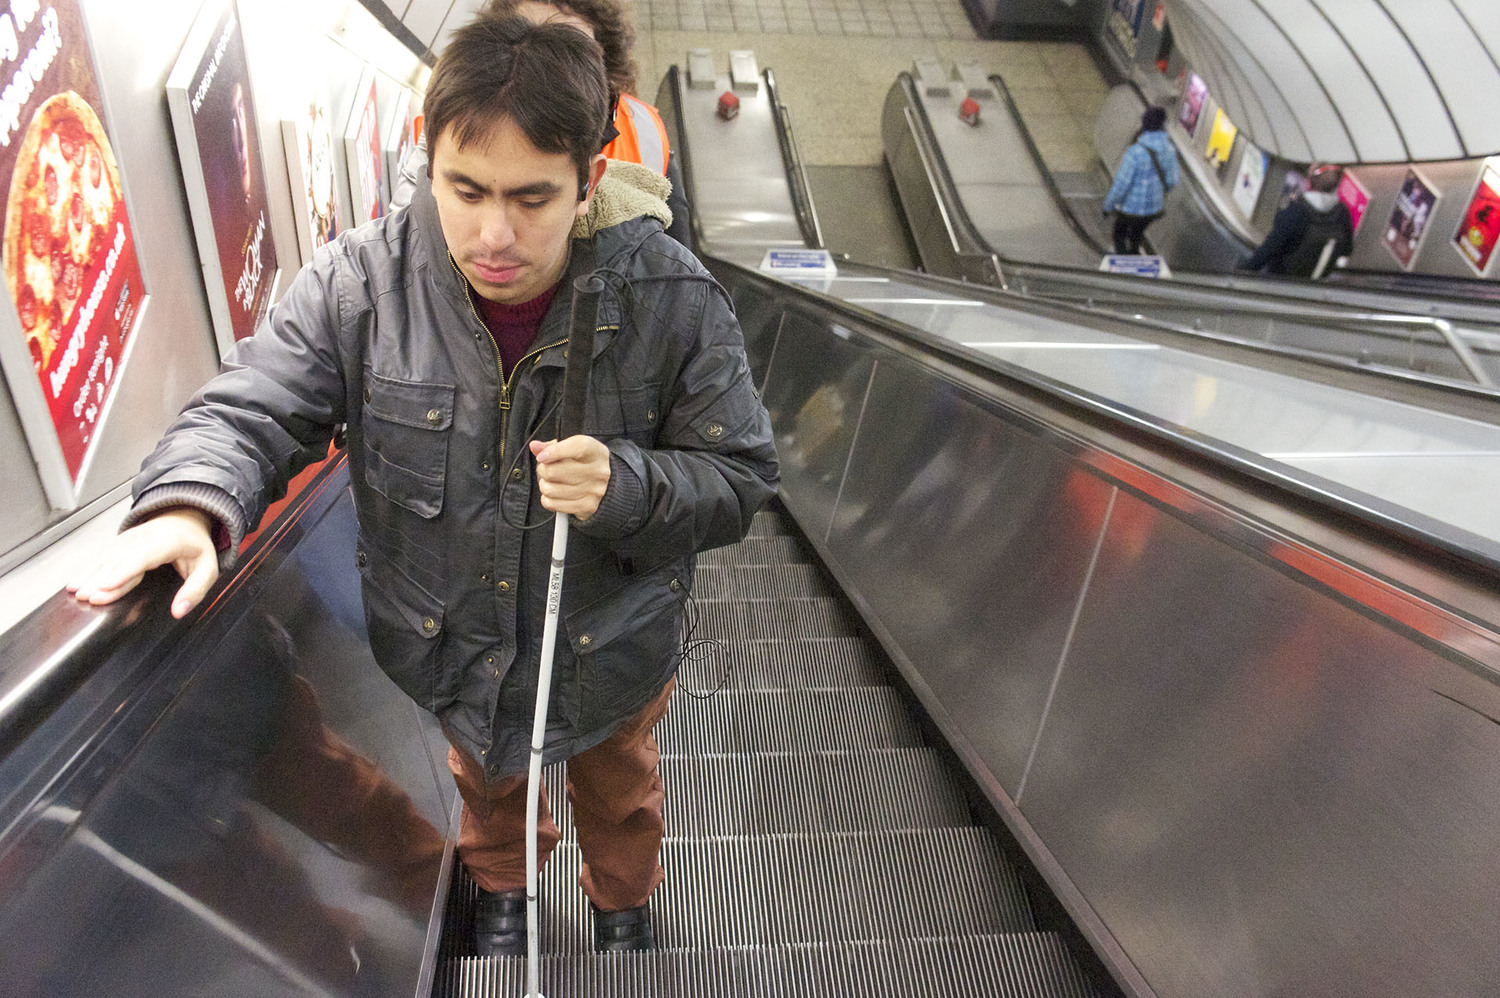 A vision impaired person going up the escalator in a tube station while trying Wayfindr